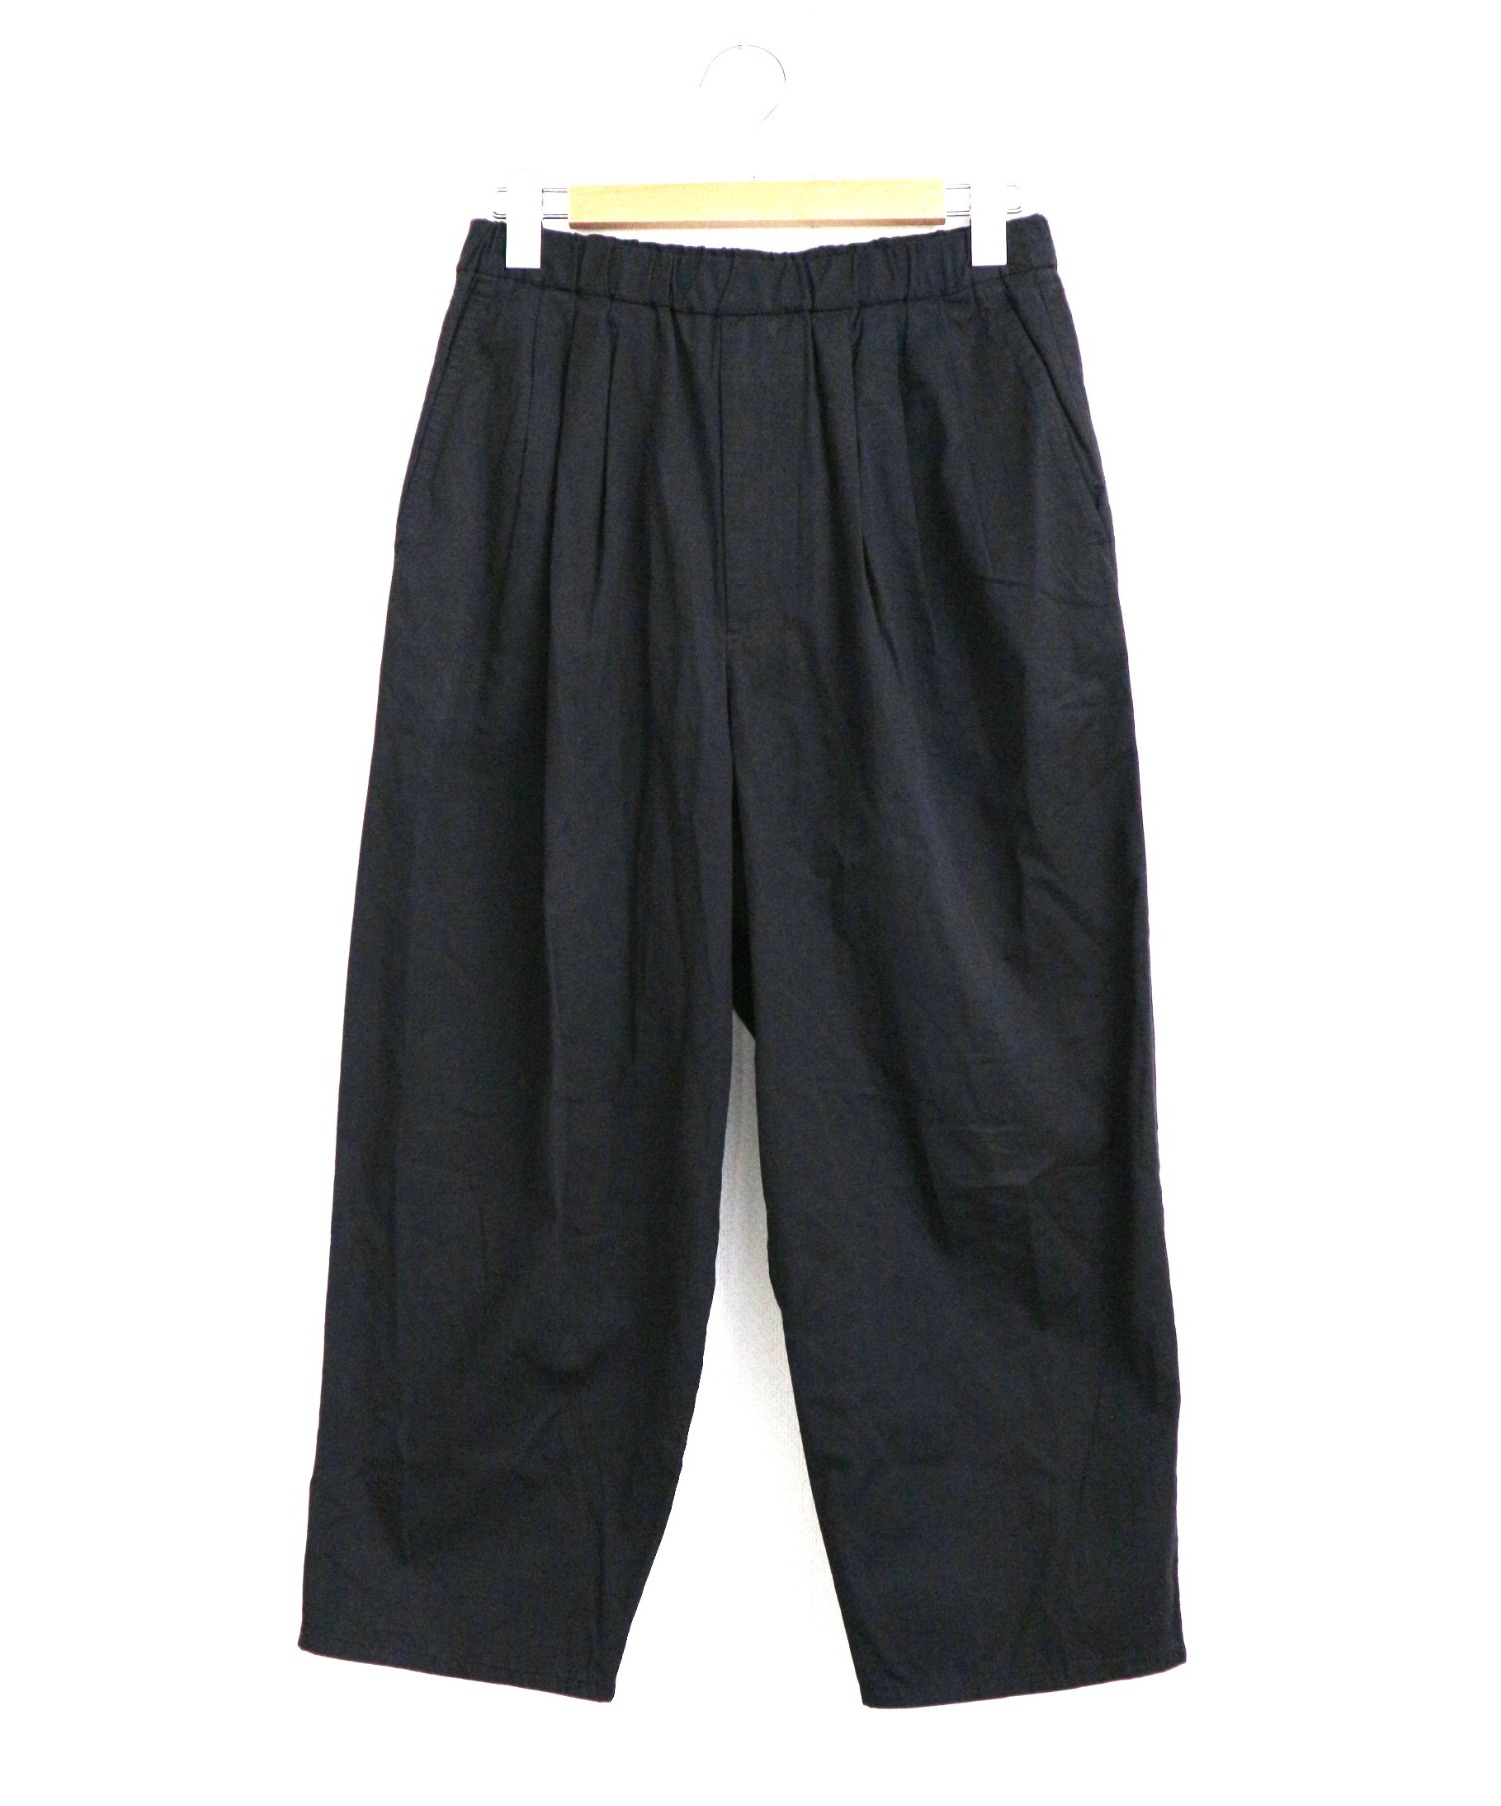 LAD MUSICIAN 3TUCK CROPPED WIDE PANTS